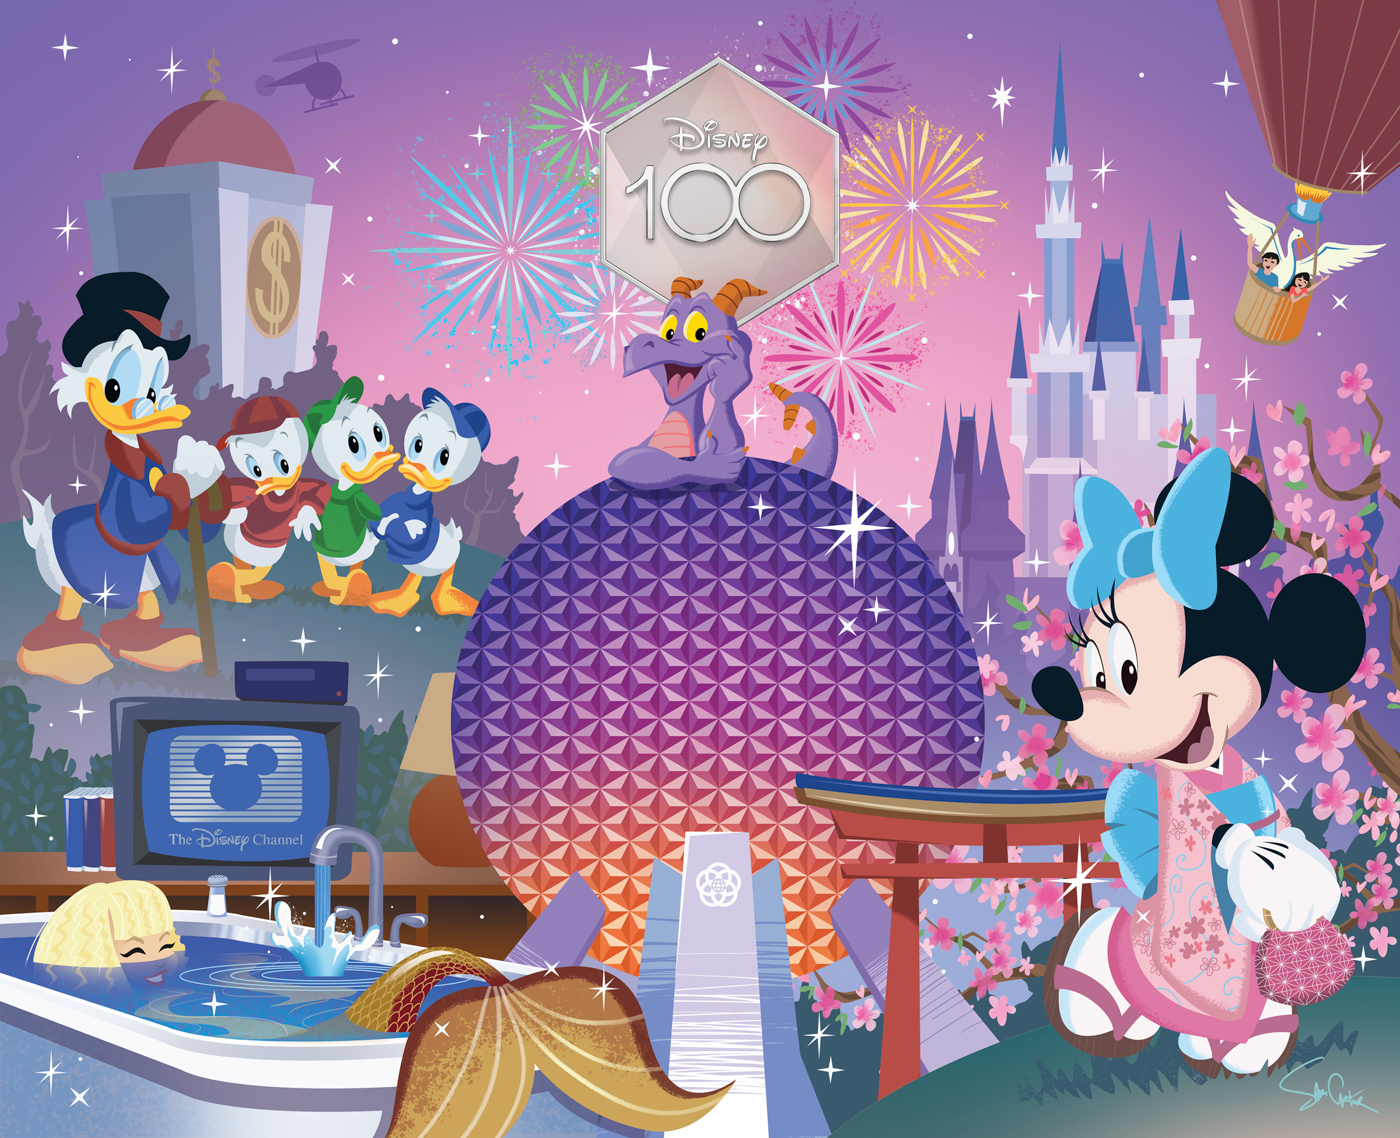 Art showcasing milestones and icons from Disney’s history in the 1980s, including Spaceship Earth, The Disney Channel, Madison from Splash, DuckTales, Minnie Mouse in a Kimono, and Figment the dragon. The illustrations are set against a purple-pink sunset like up by multicolor fireworks. In the top center of the art is an iridescent, diamond-like logo for Disney100.